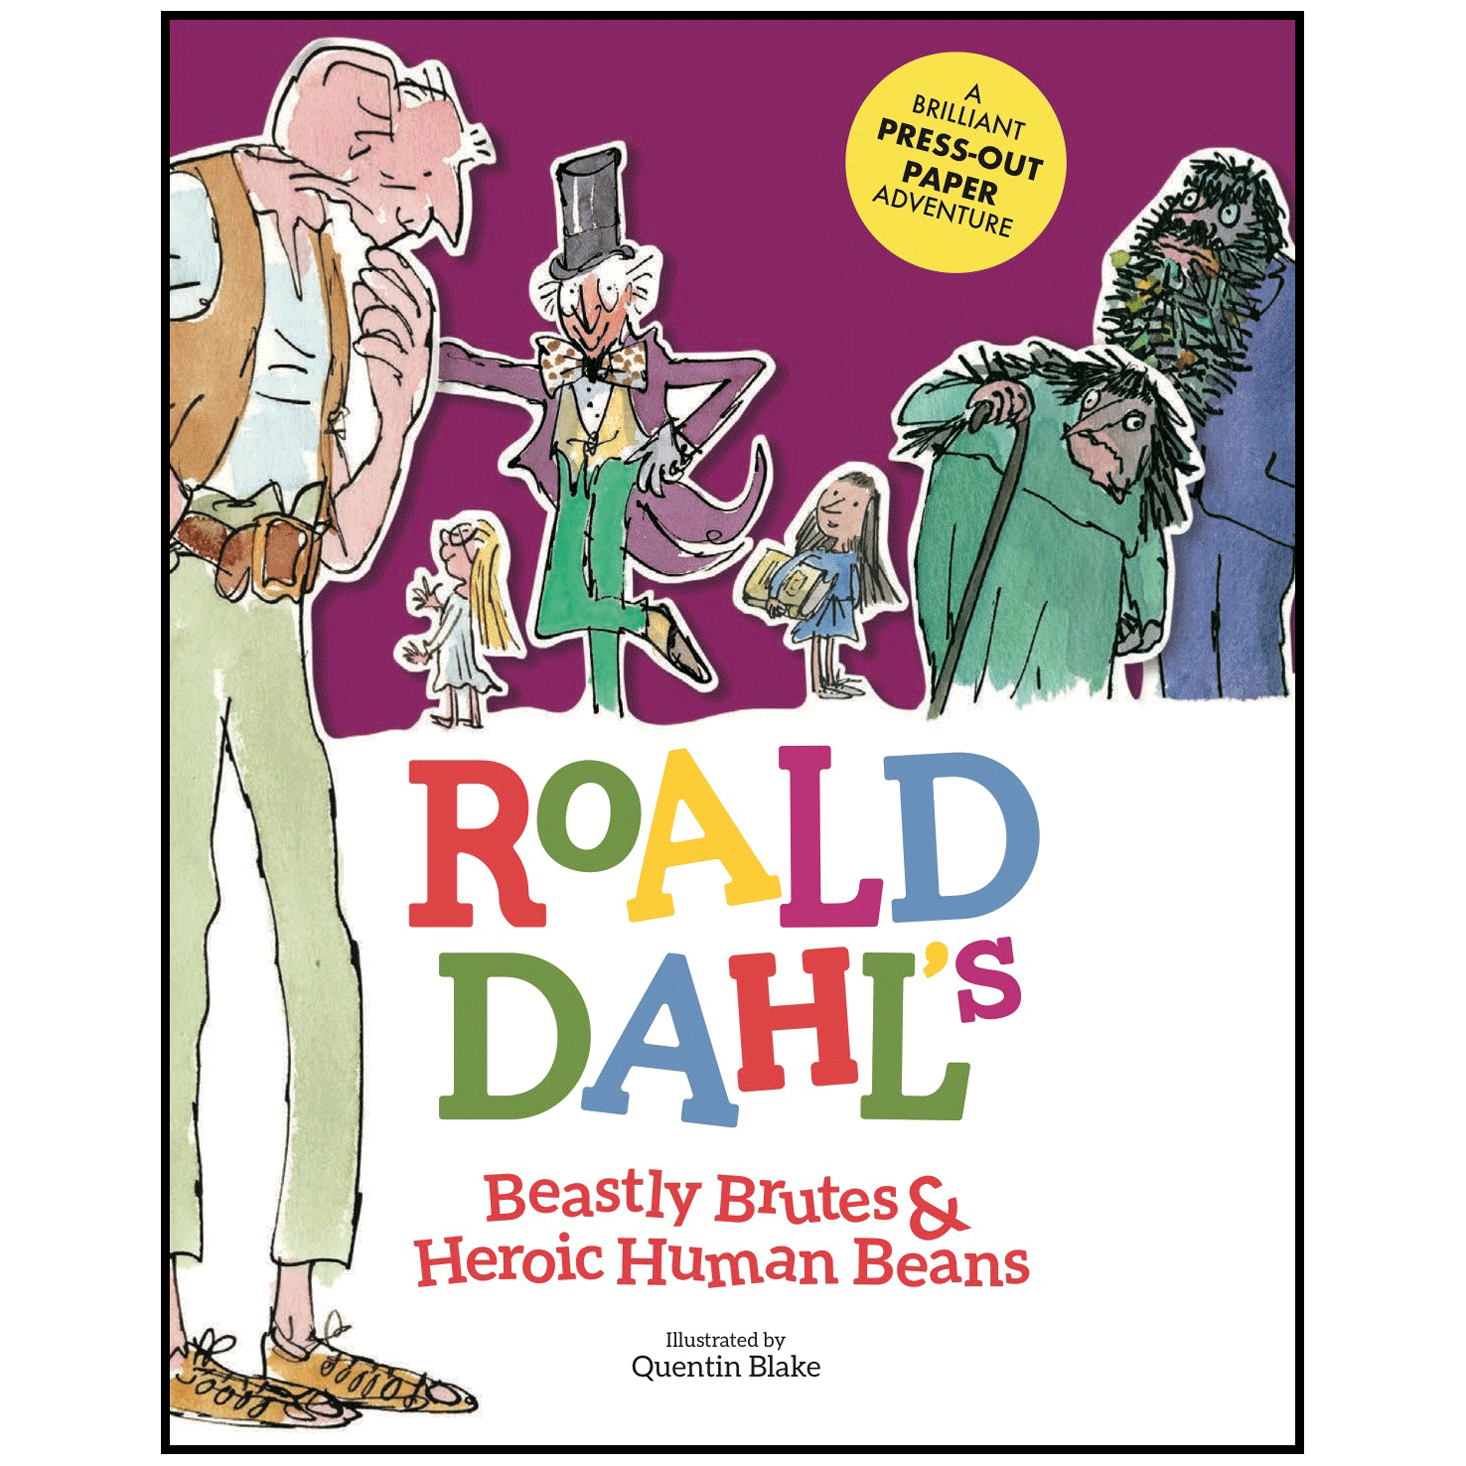 A press-out book based on Roald Dahl stories with illustrations by Quentin Blake